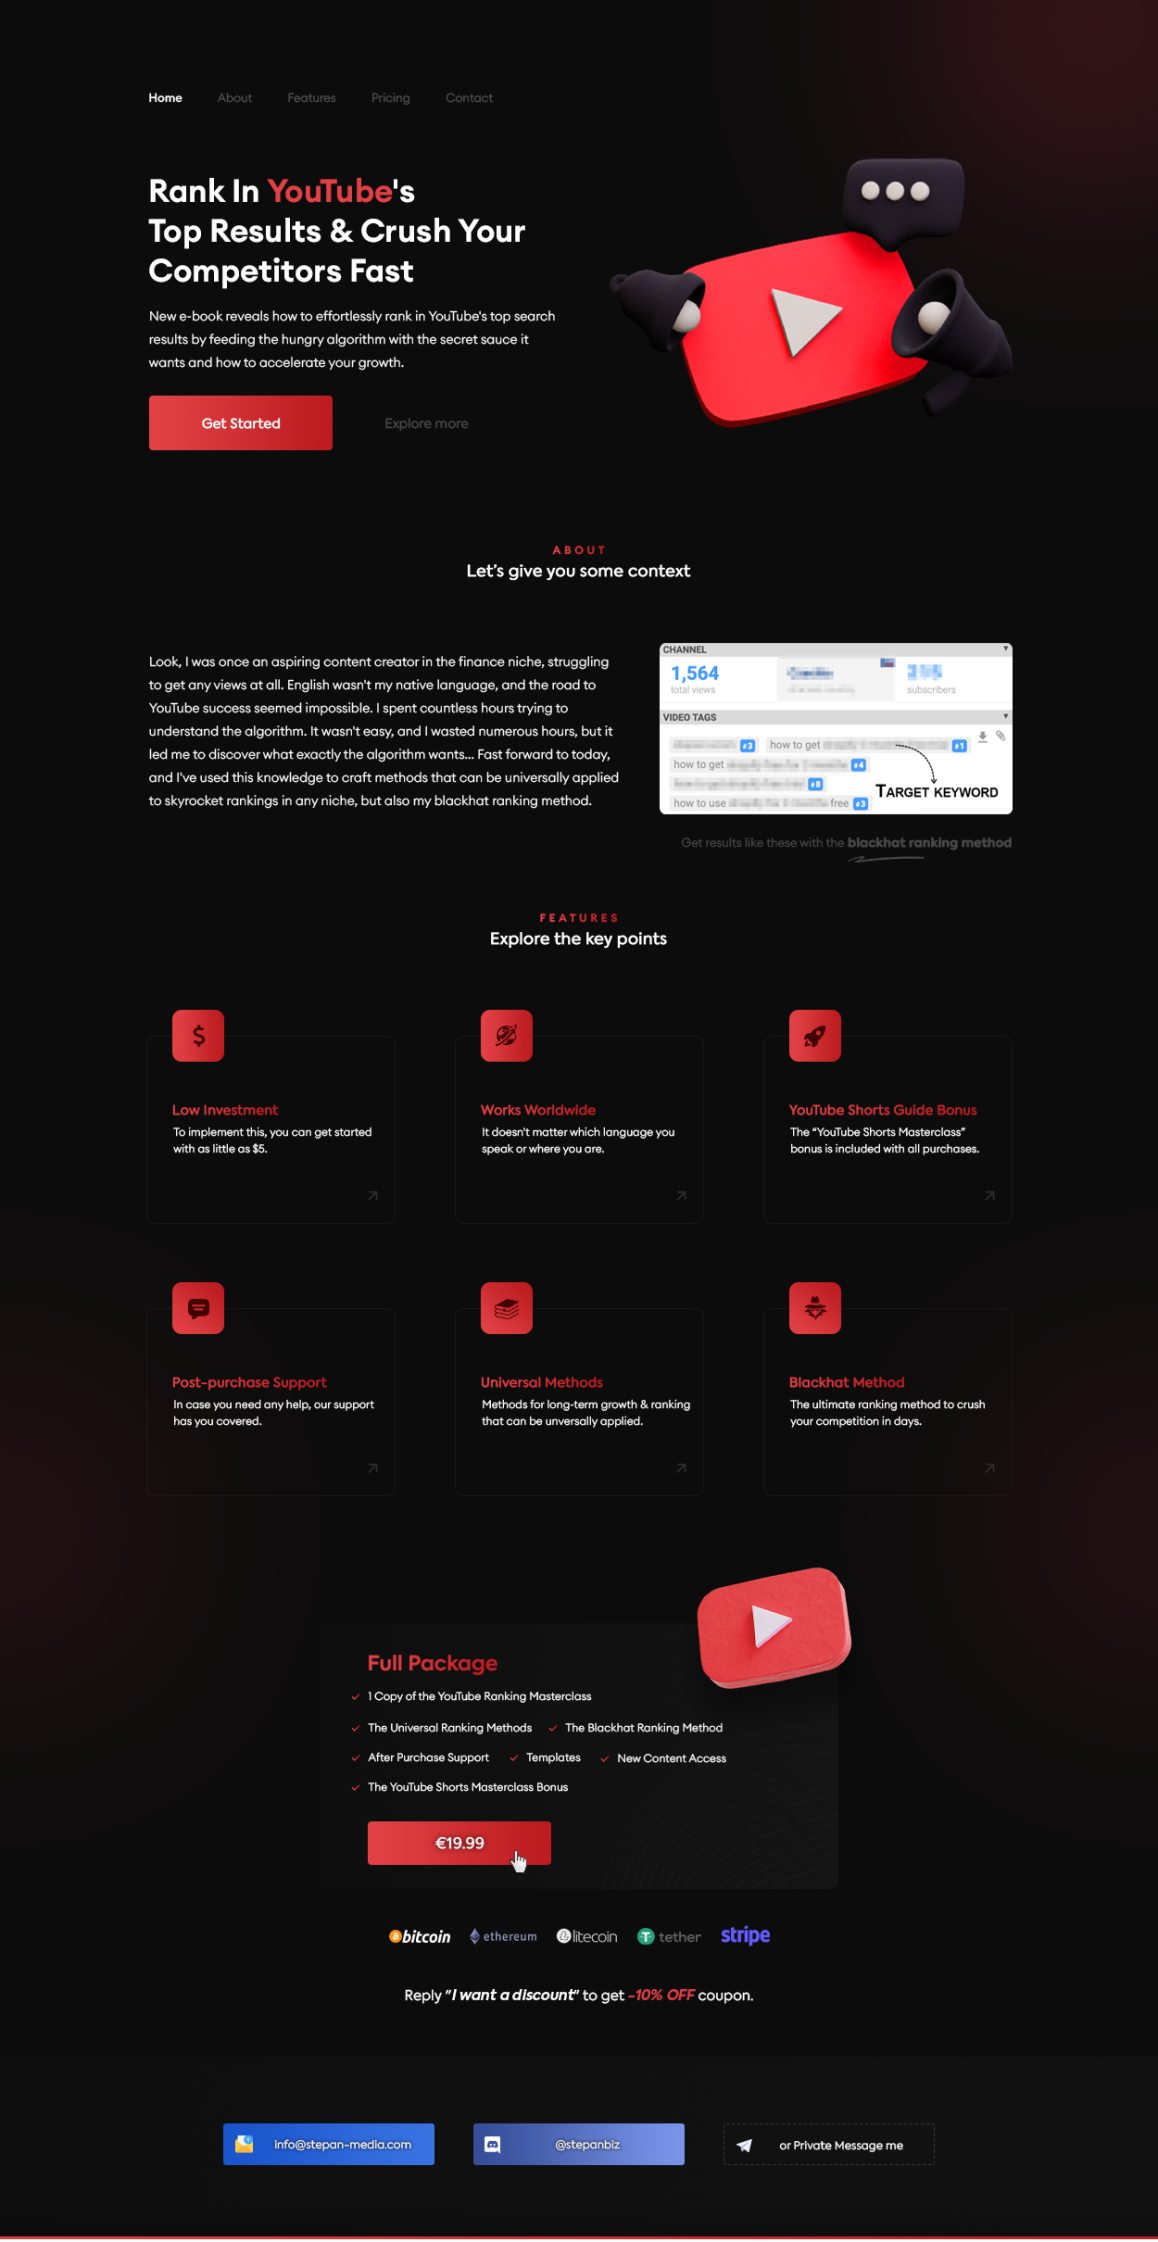 ✅[STEP-BY-STEP] ⚡️ YouTube Ranking Secrets ⚡️ Universal + Blackhat Ranking & Growth Methods ⚡️ Crush Competition Fast! ✅